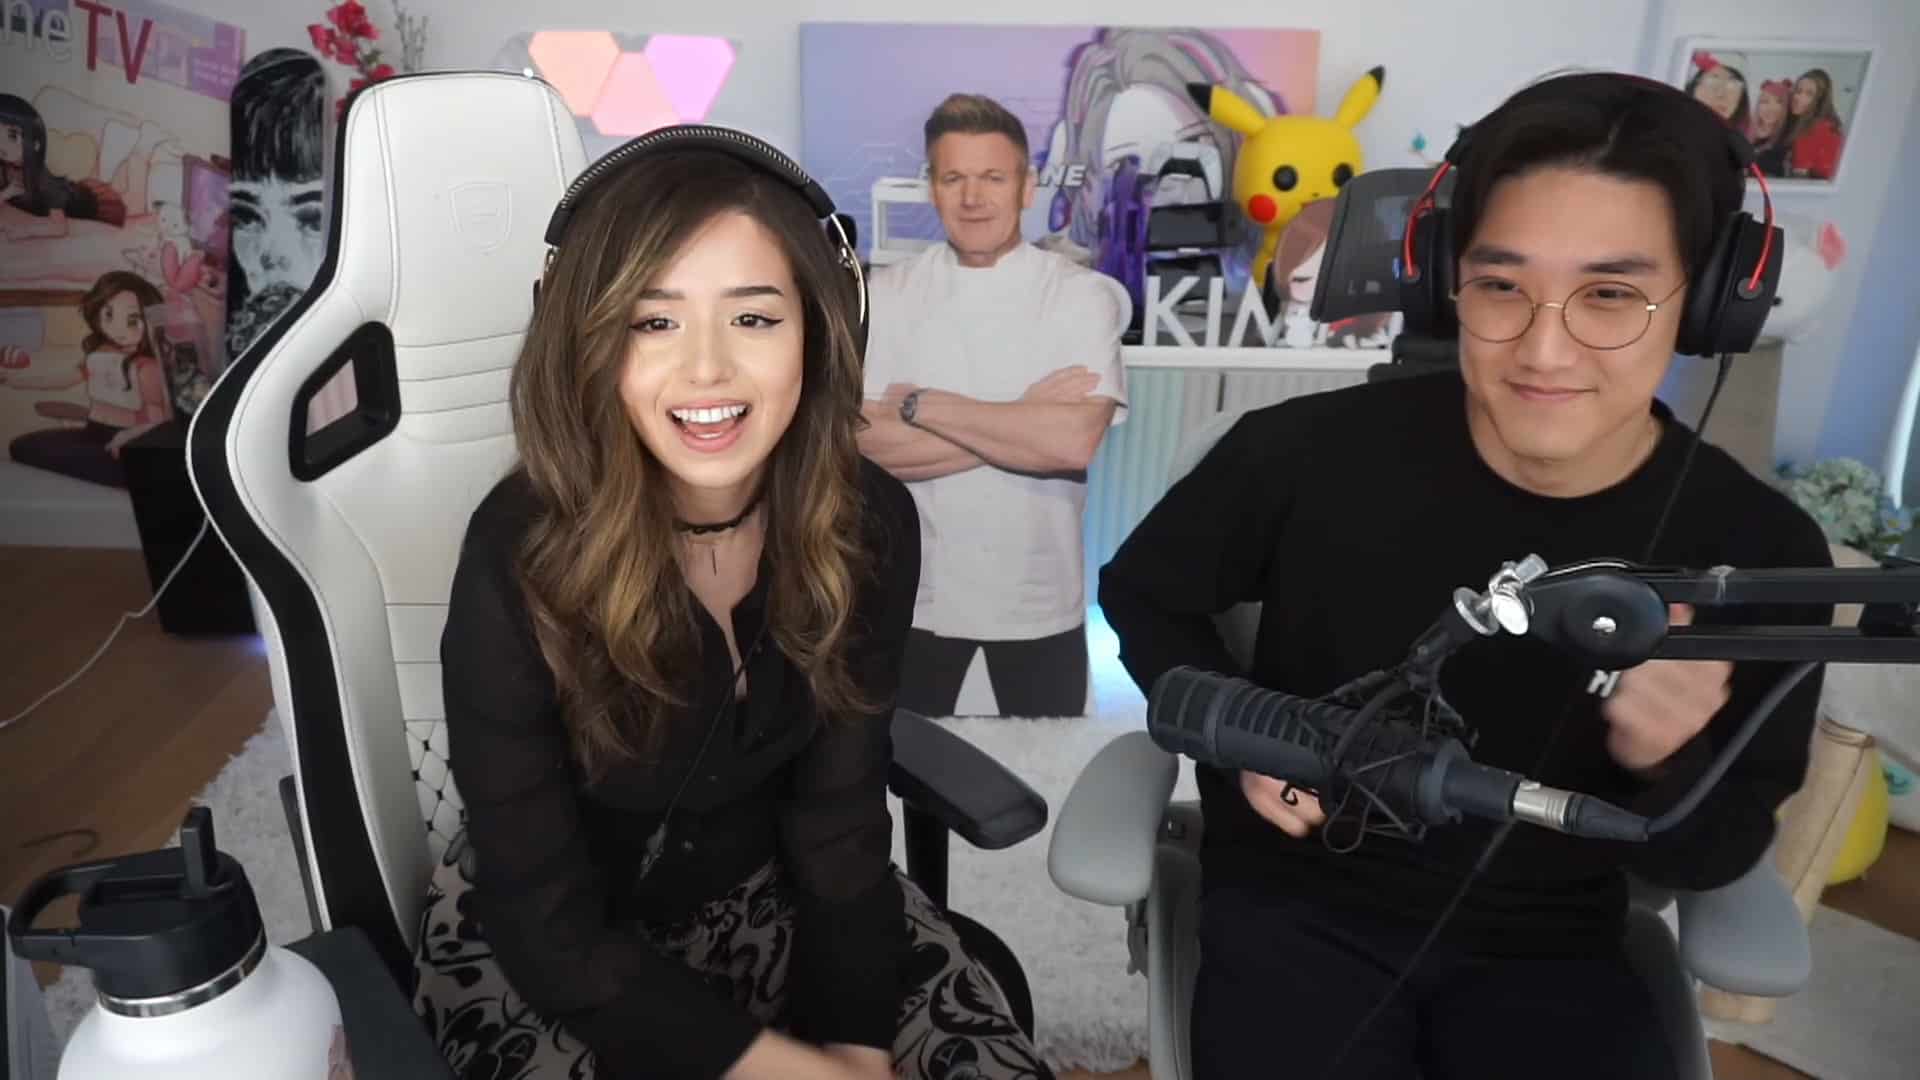 Pokimane and Kevin appear on Twitch together.